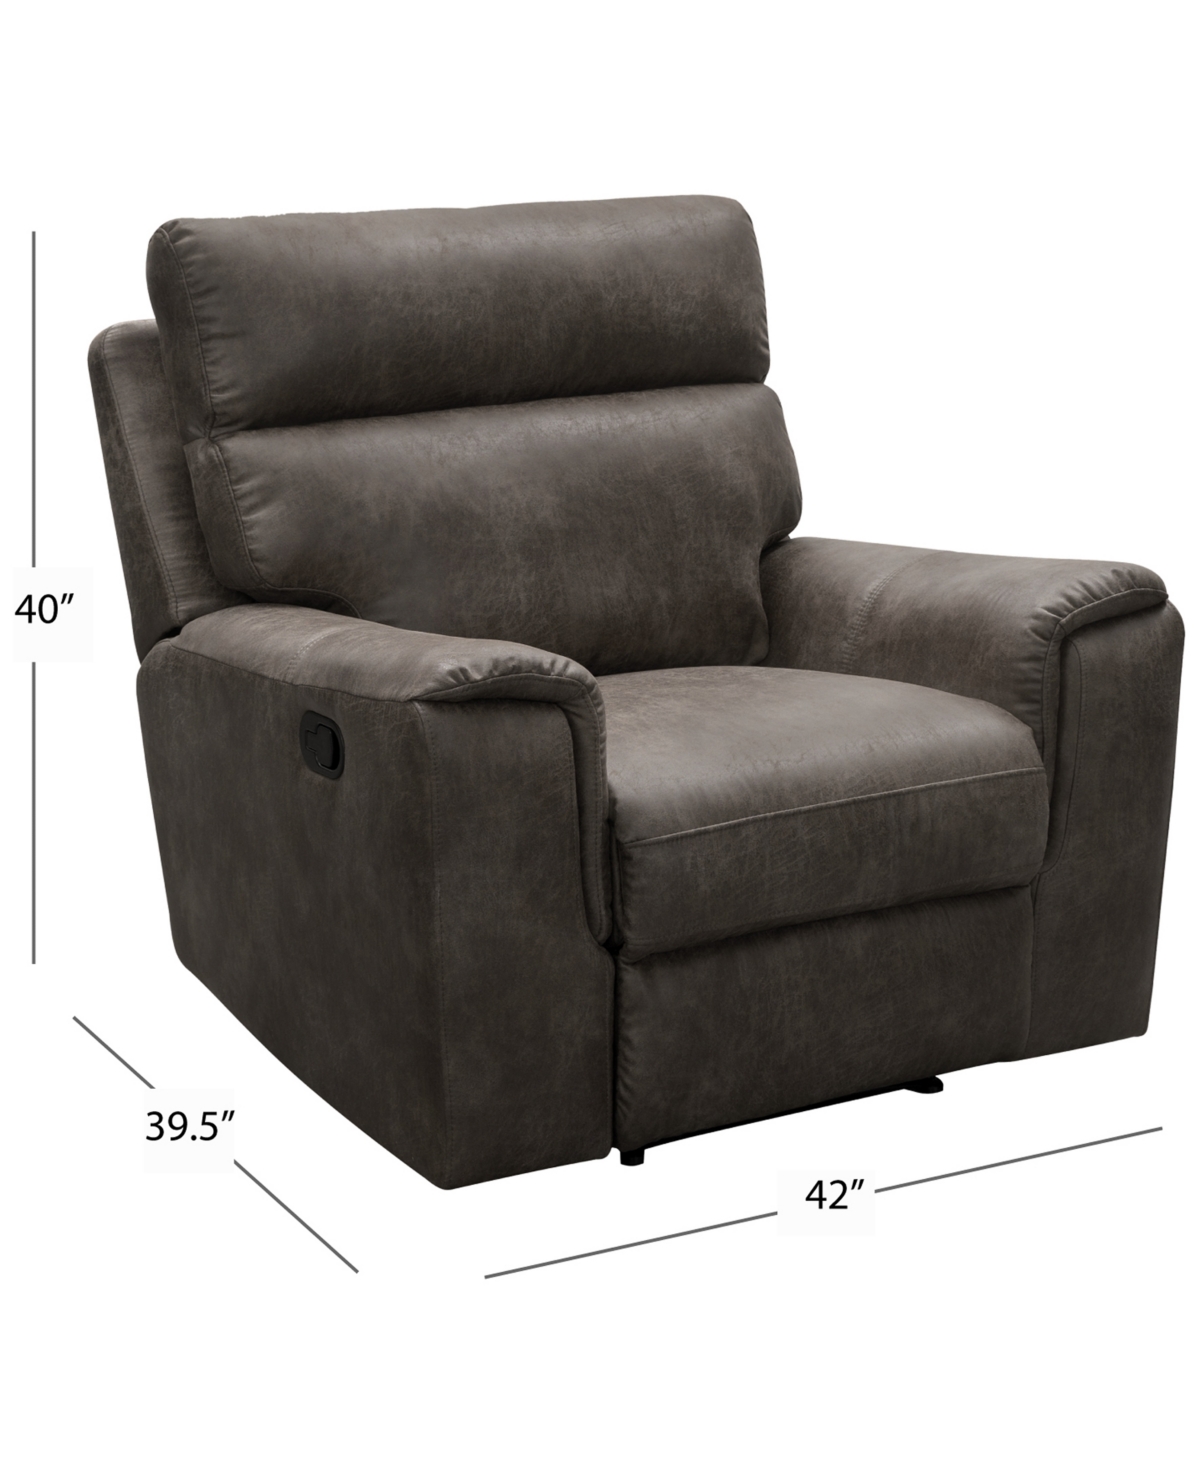 Shop Abbyson Living Lawrence 38.5" Fabric Recliner In Dark Brown